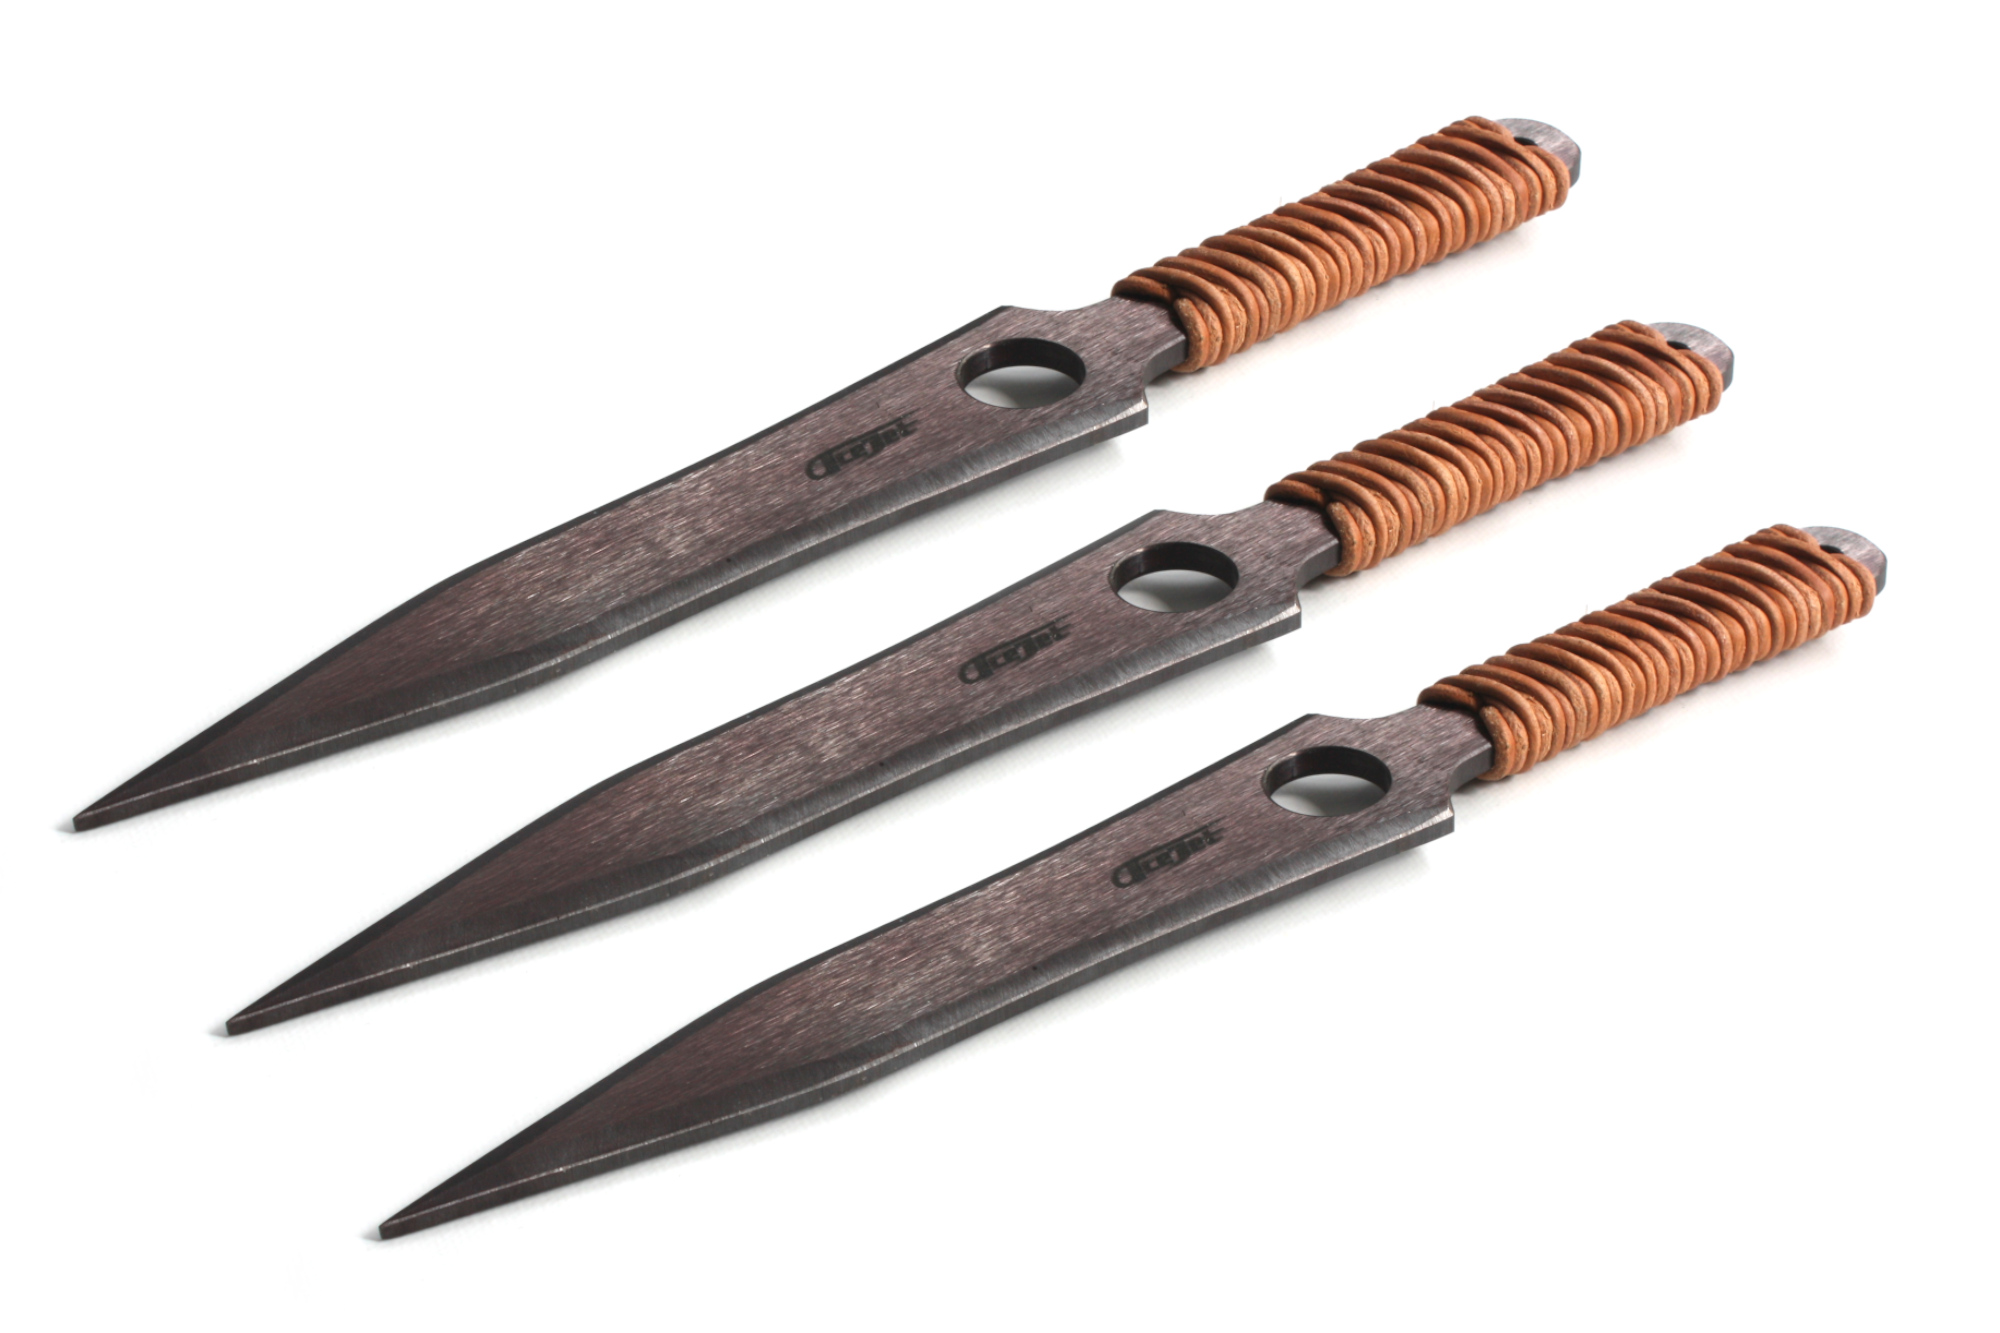 ACEJET MAXIMUS SHADOW VINTAGE - Spinner Throwing knife - set of 3